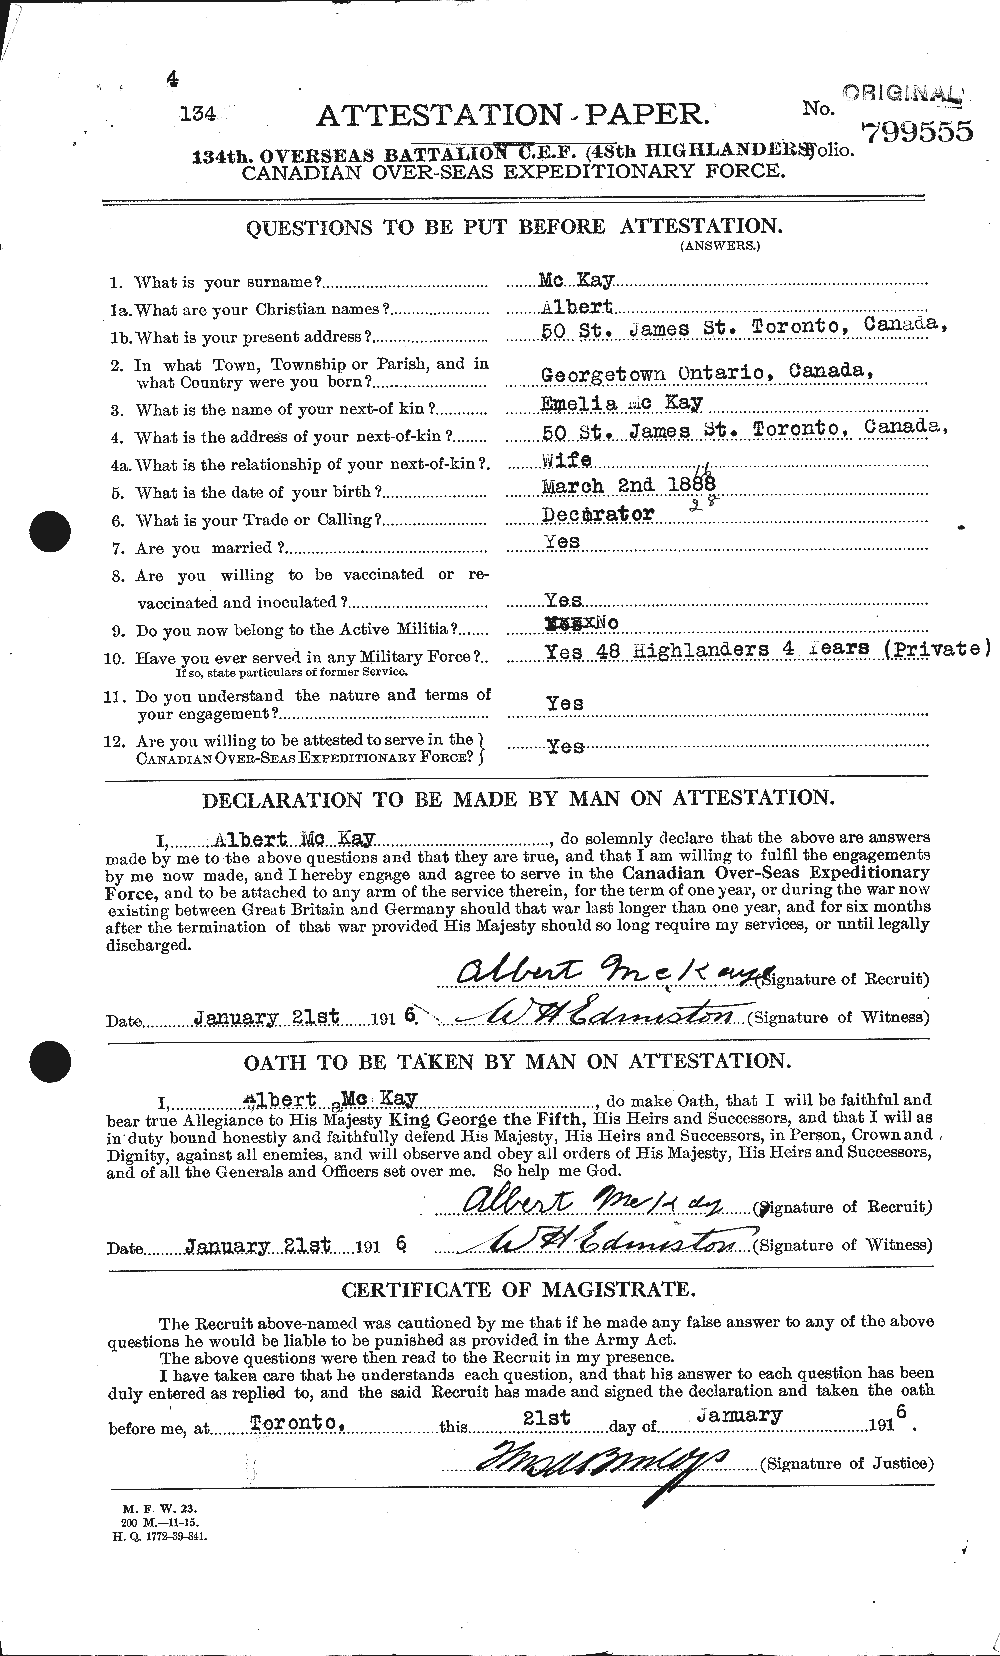 Personnel Records of the First World War - CEF 530878a